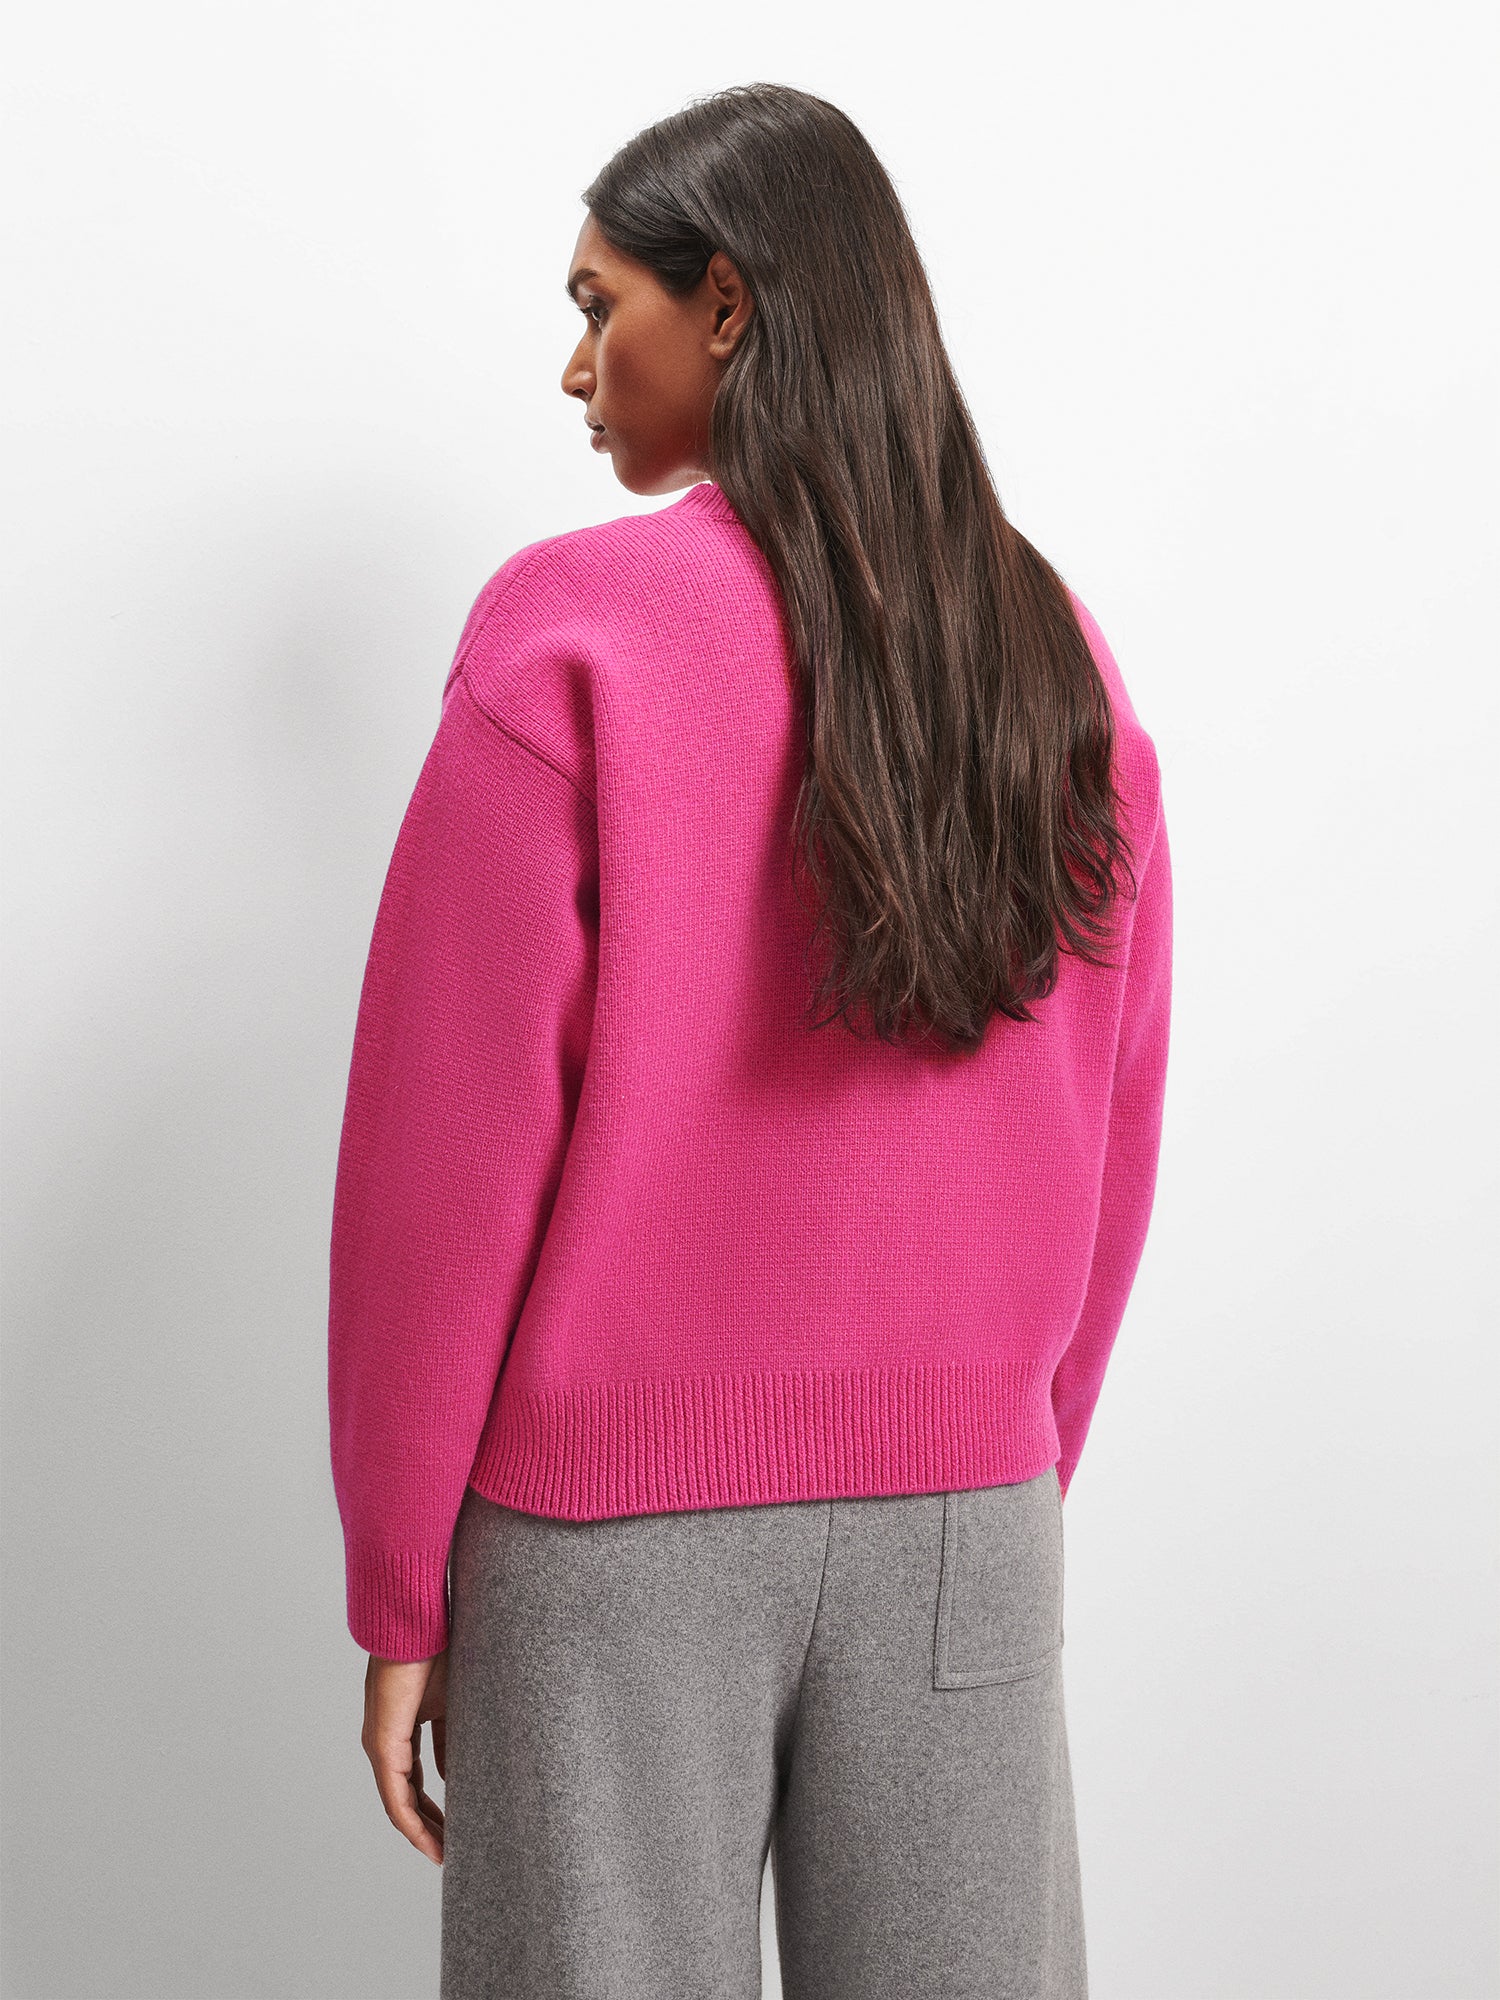 Womens_Recycled_Cashmere_Knit_Crew_Neck_Sweater_Tourmaline_Pink-female-2